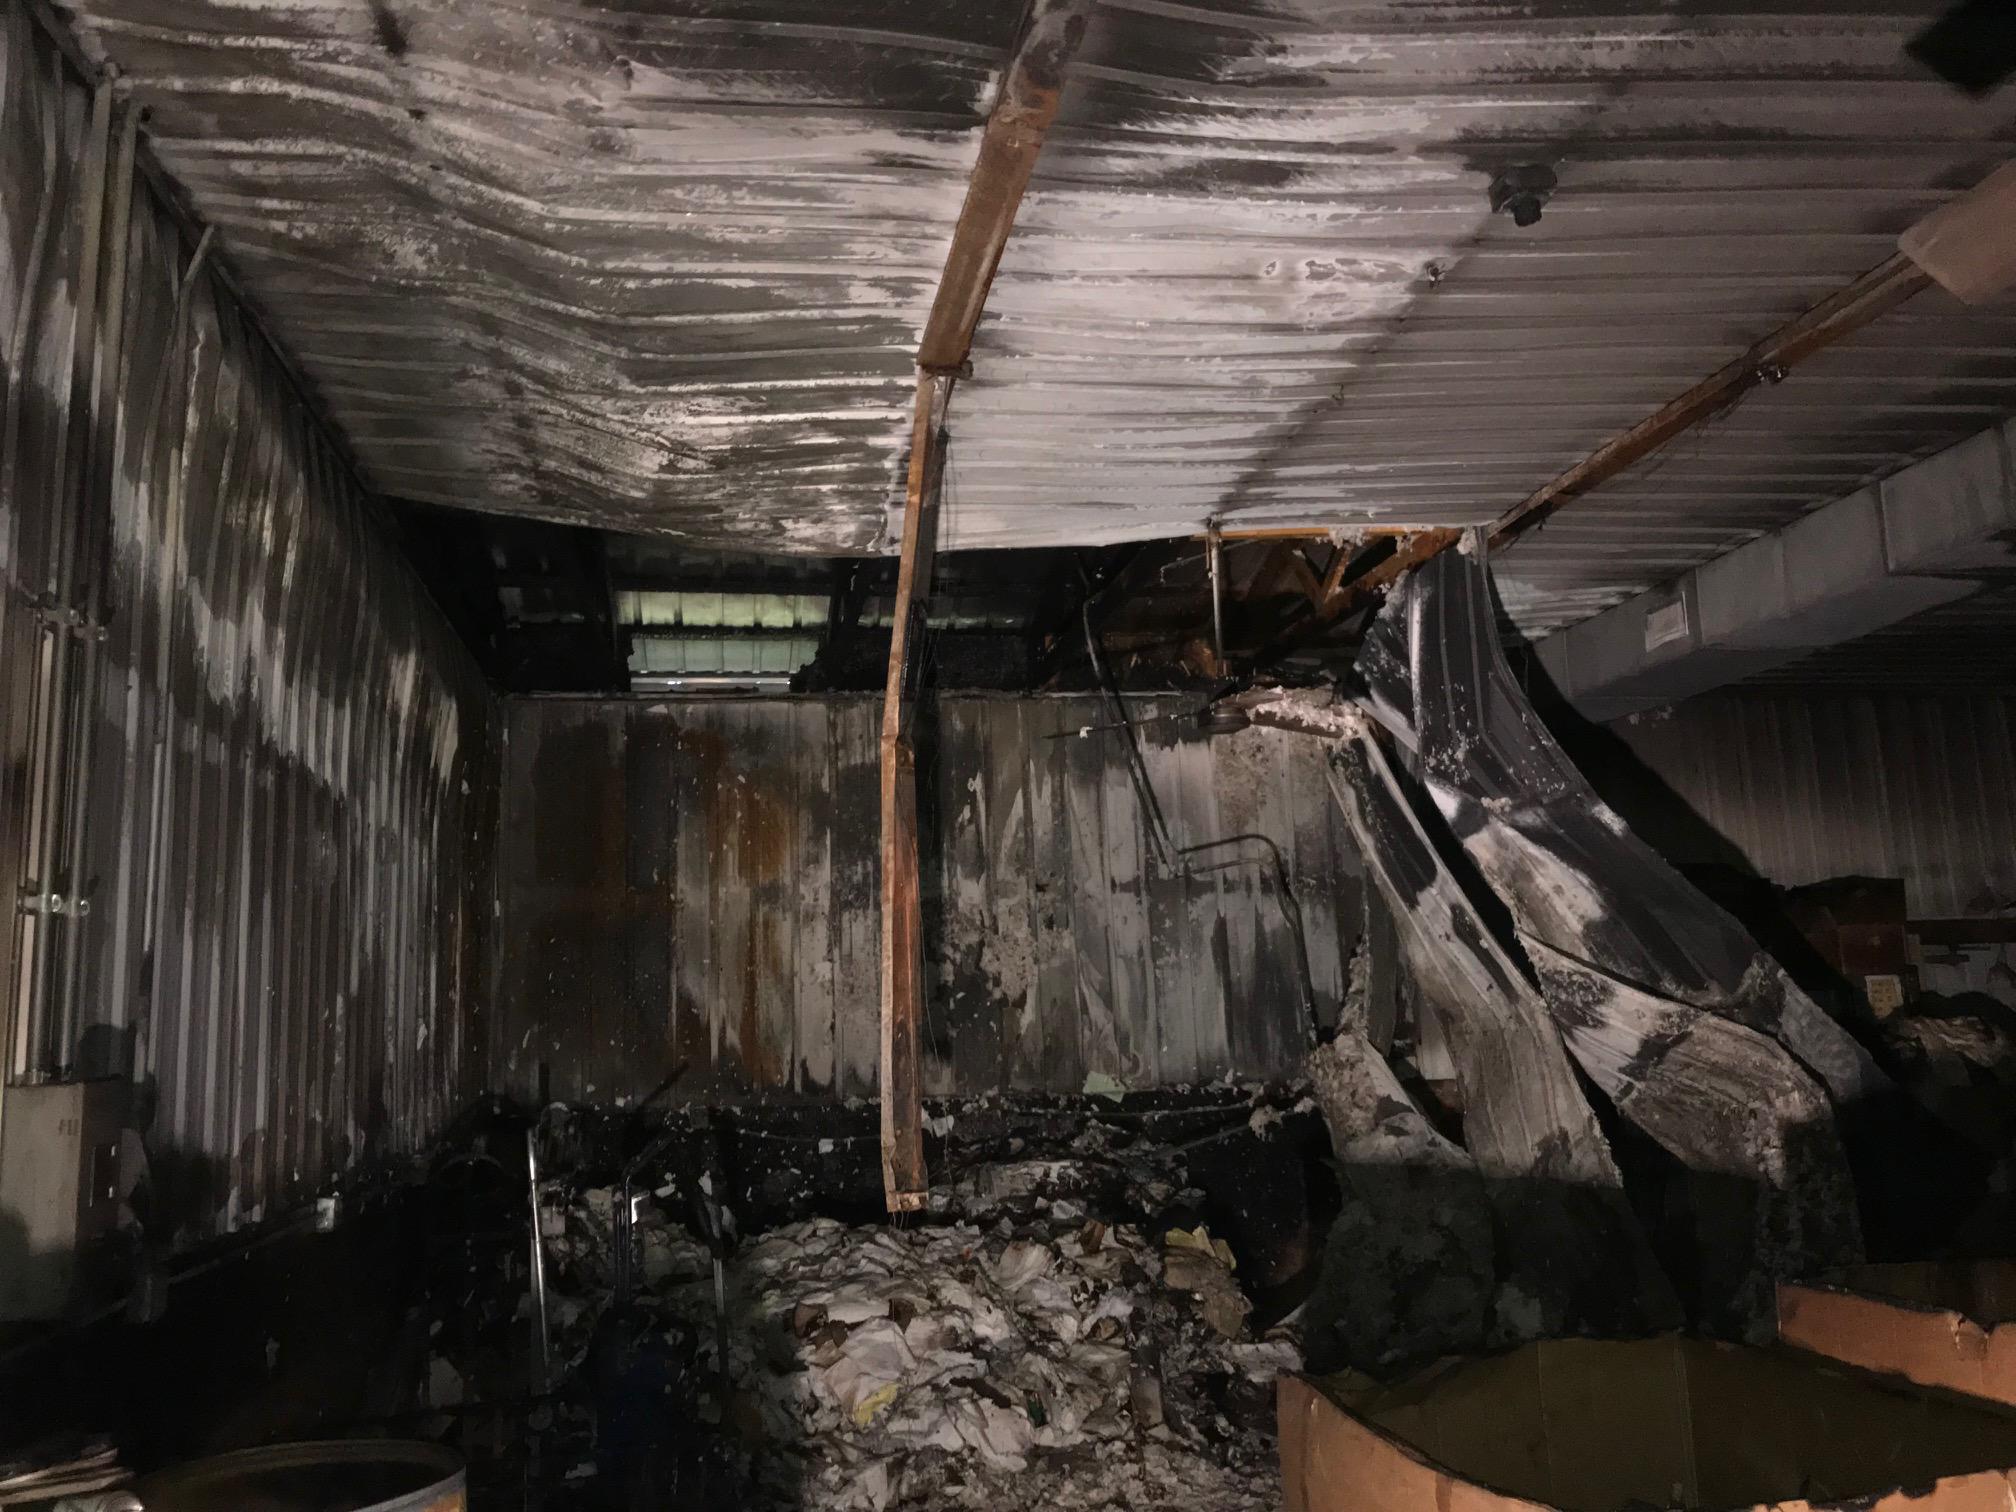 Fire in the basement causes a huge amount of damage.